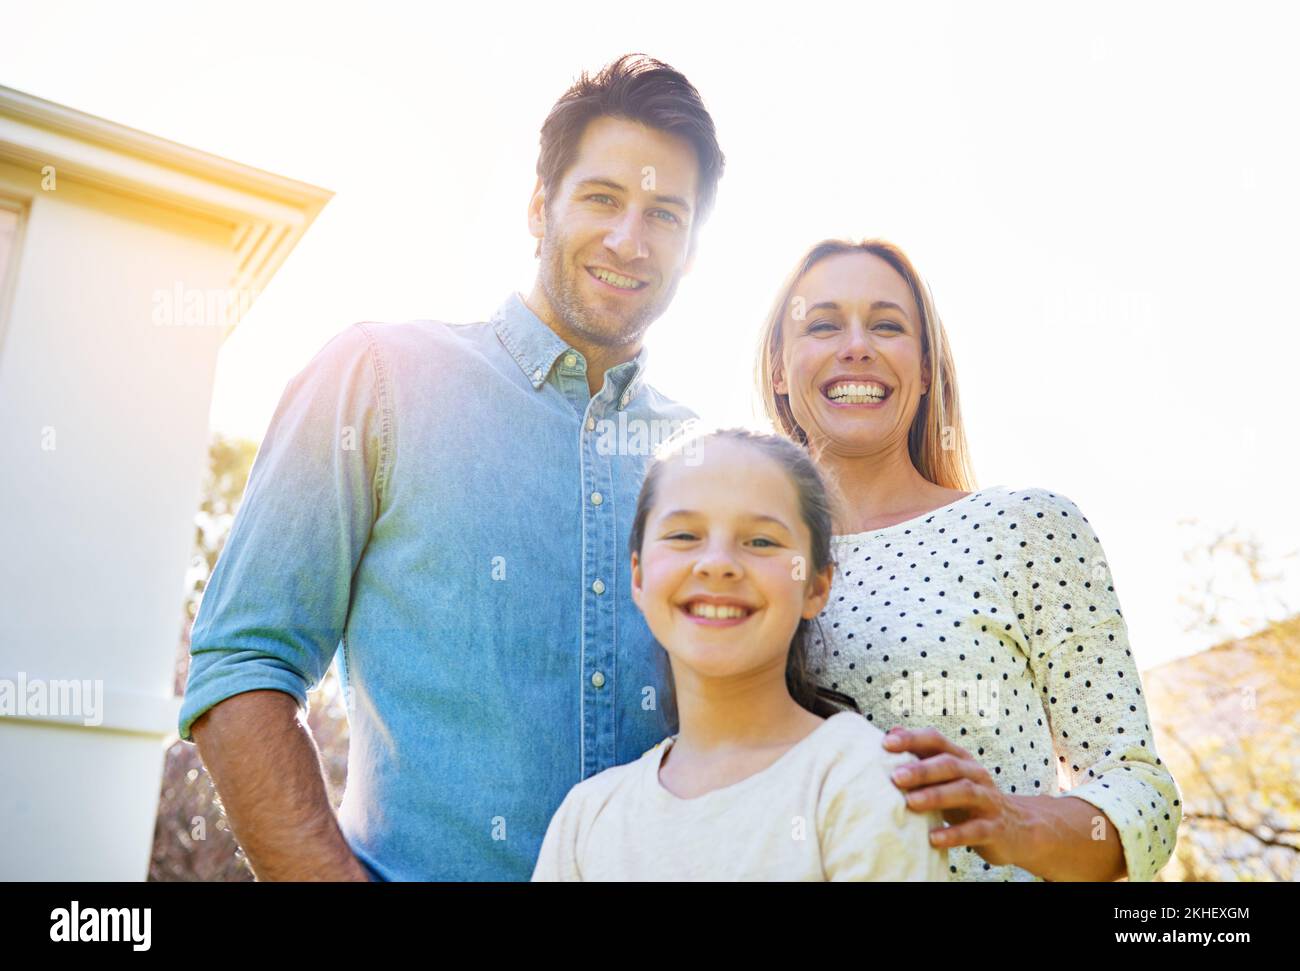 Family is the key to happiness. Portrait of a family of three spending time together. Stock Photo